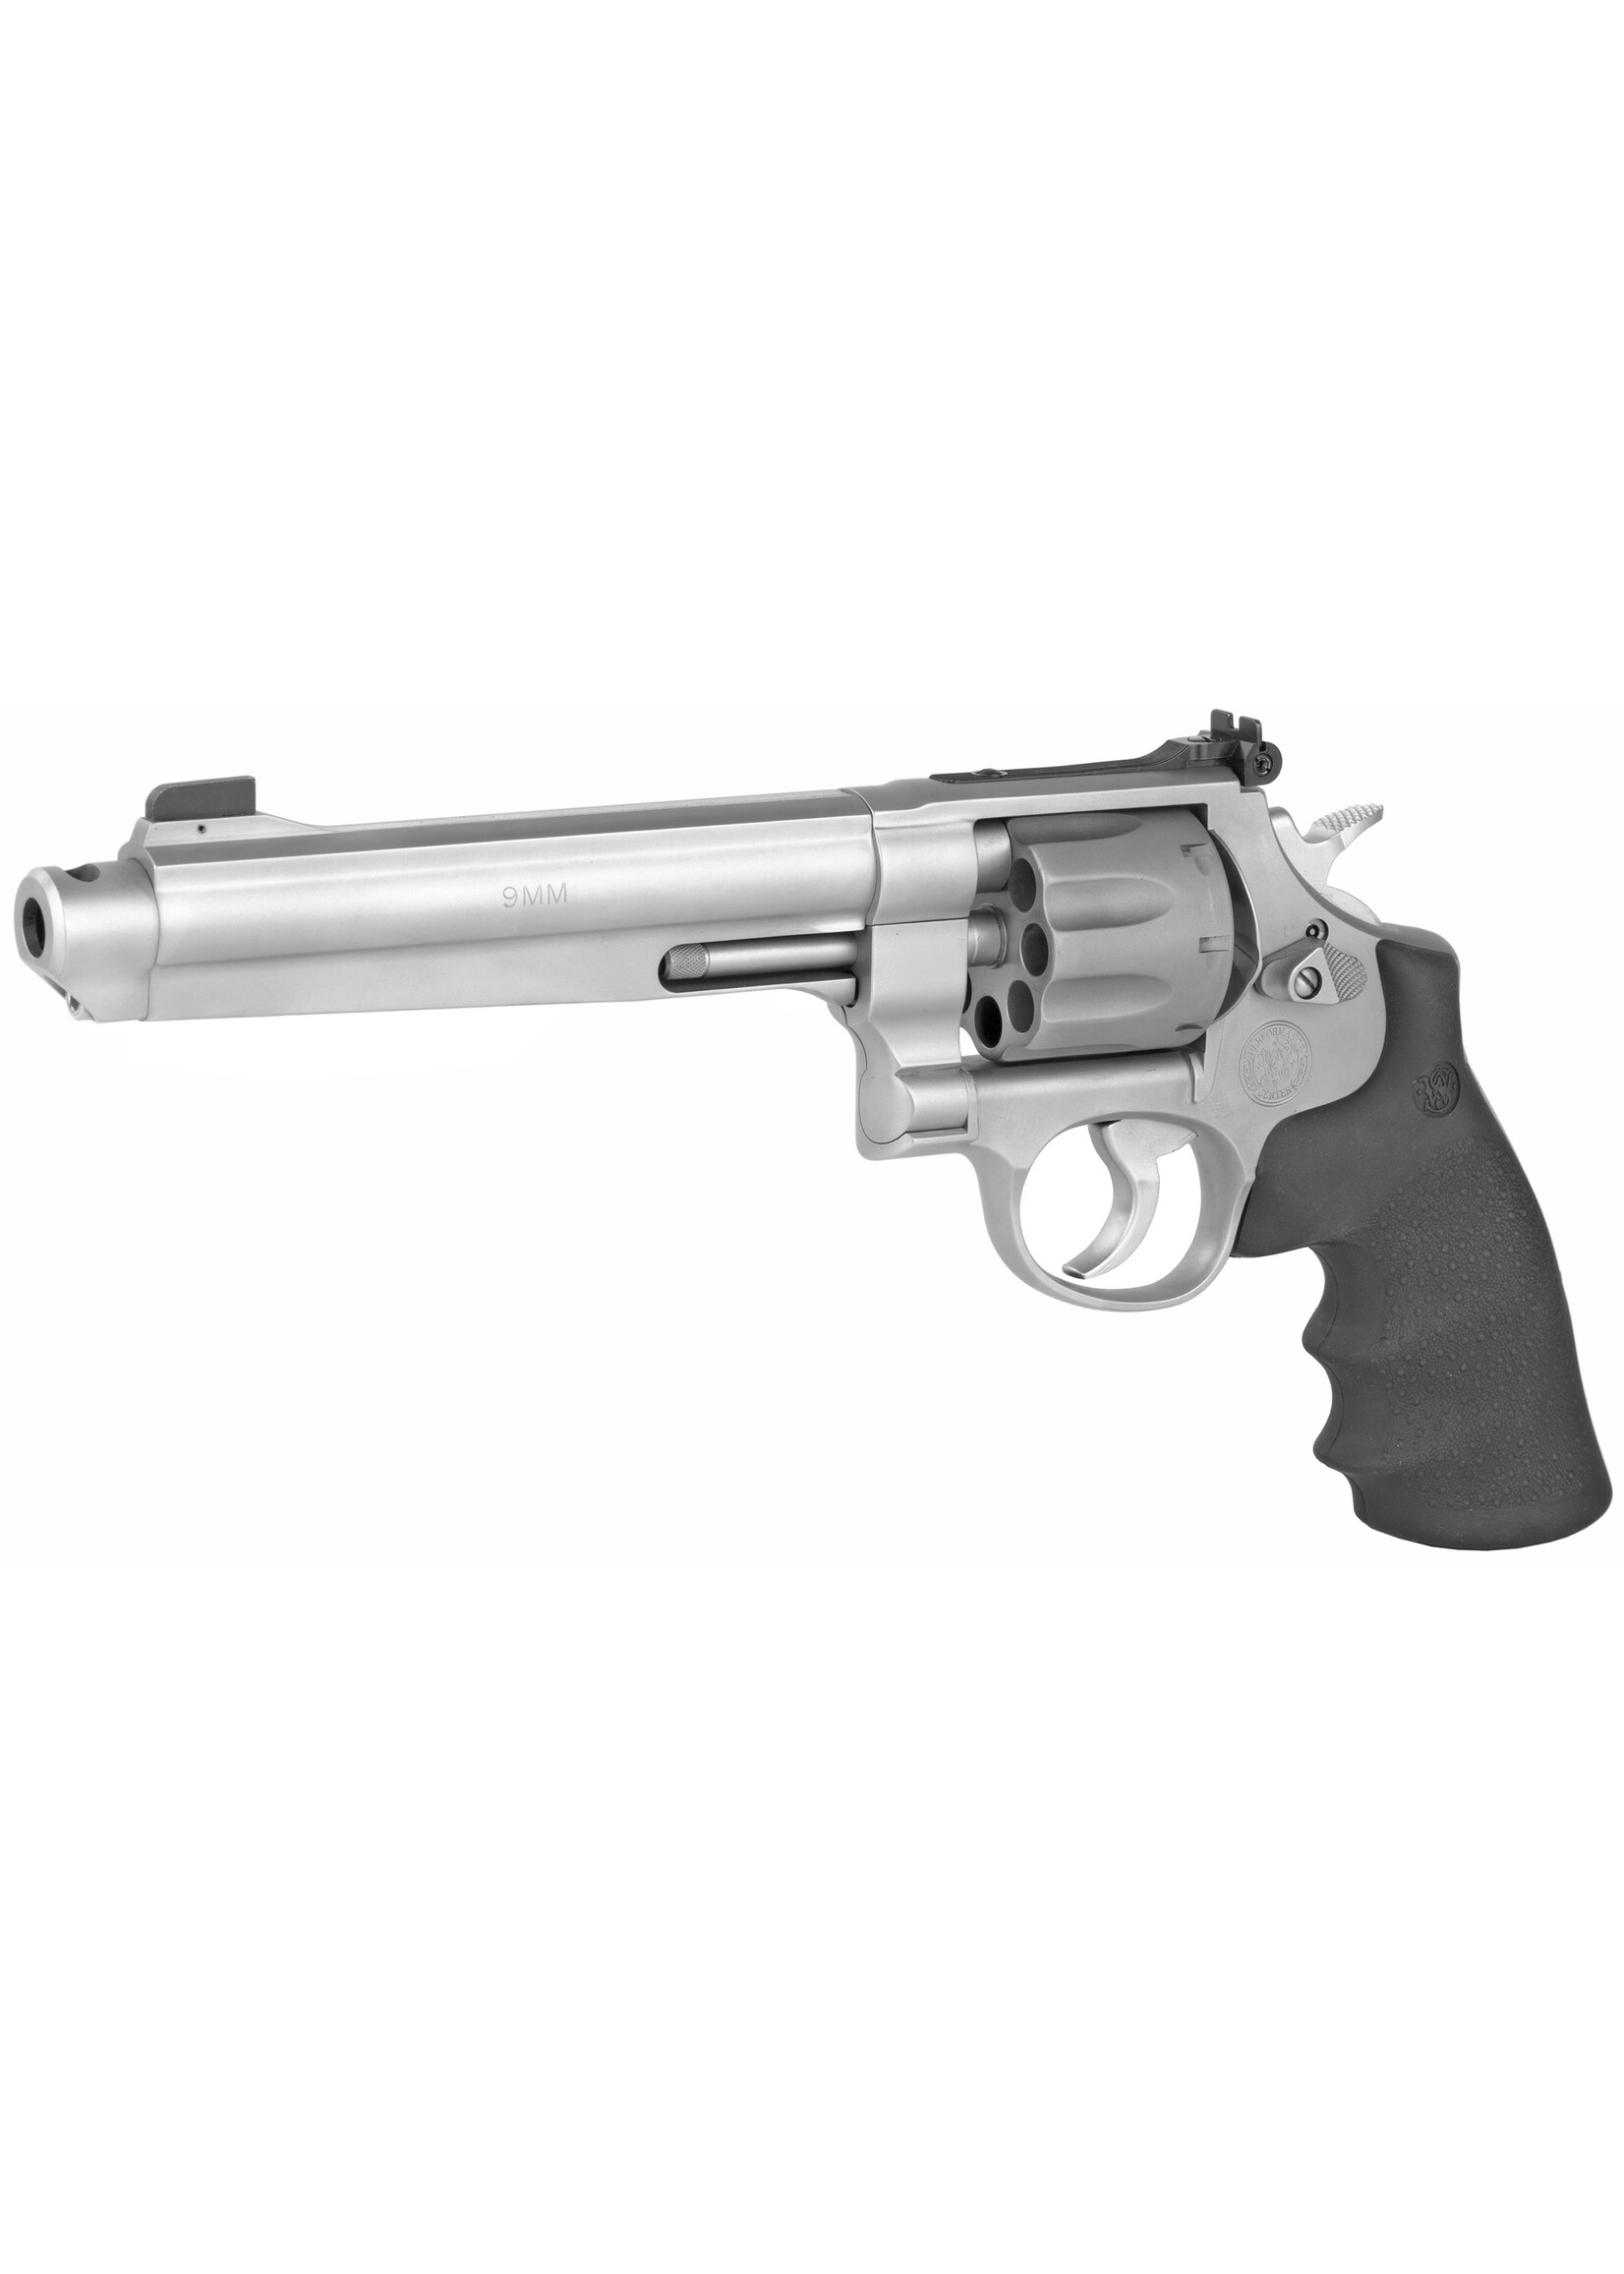 SMITH & WESSON MODEL 929 PC 9MM 8RD 6.5" PORTED BBL